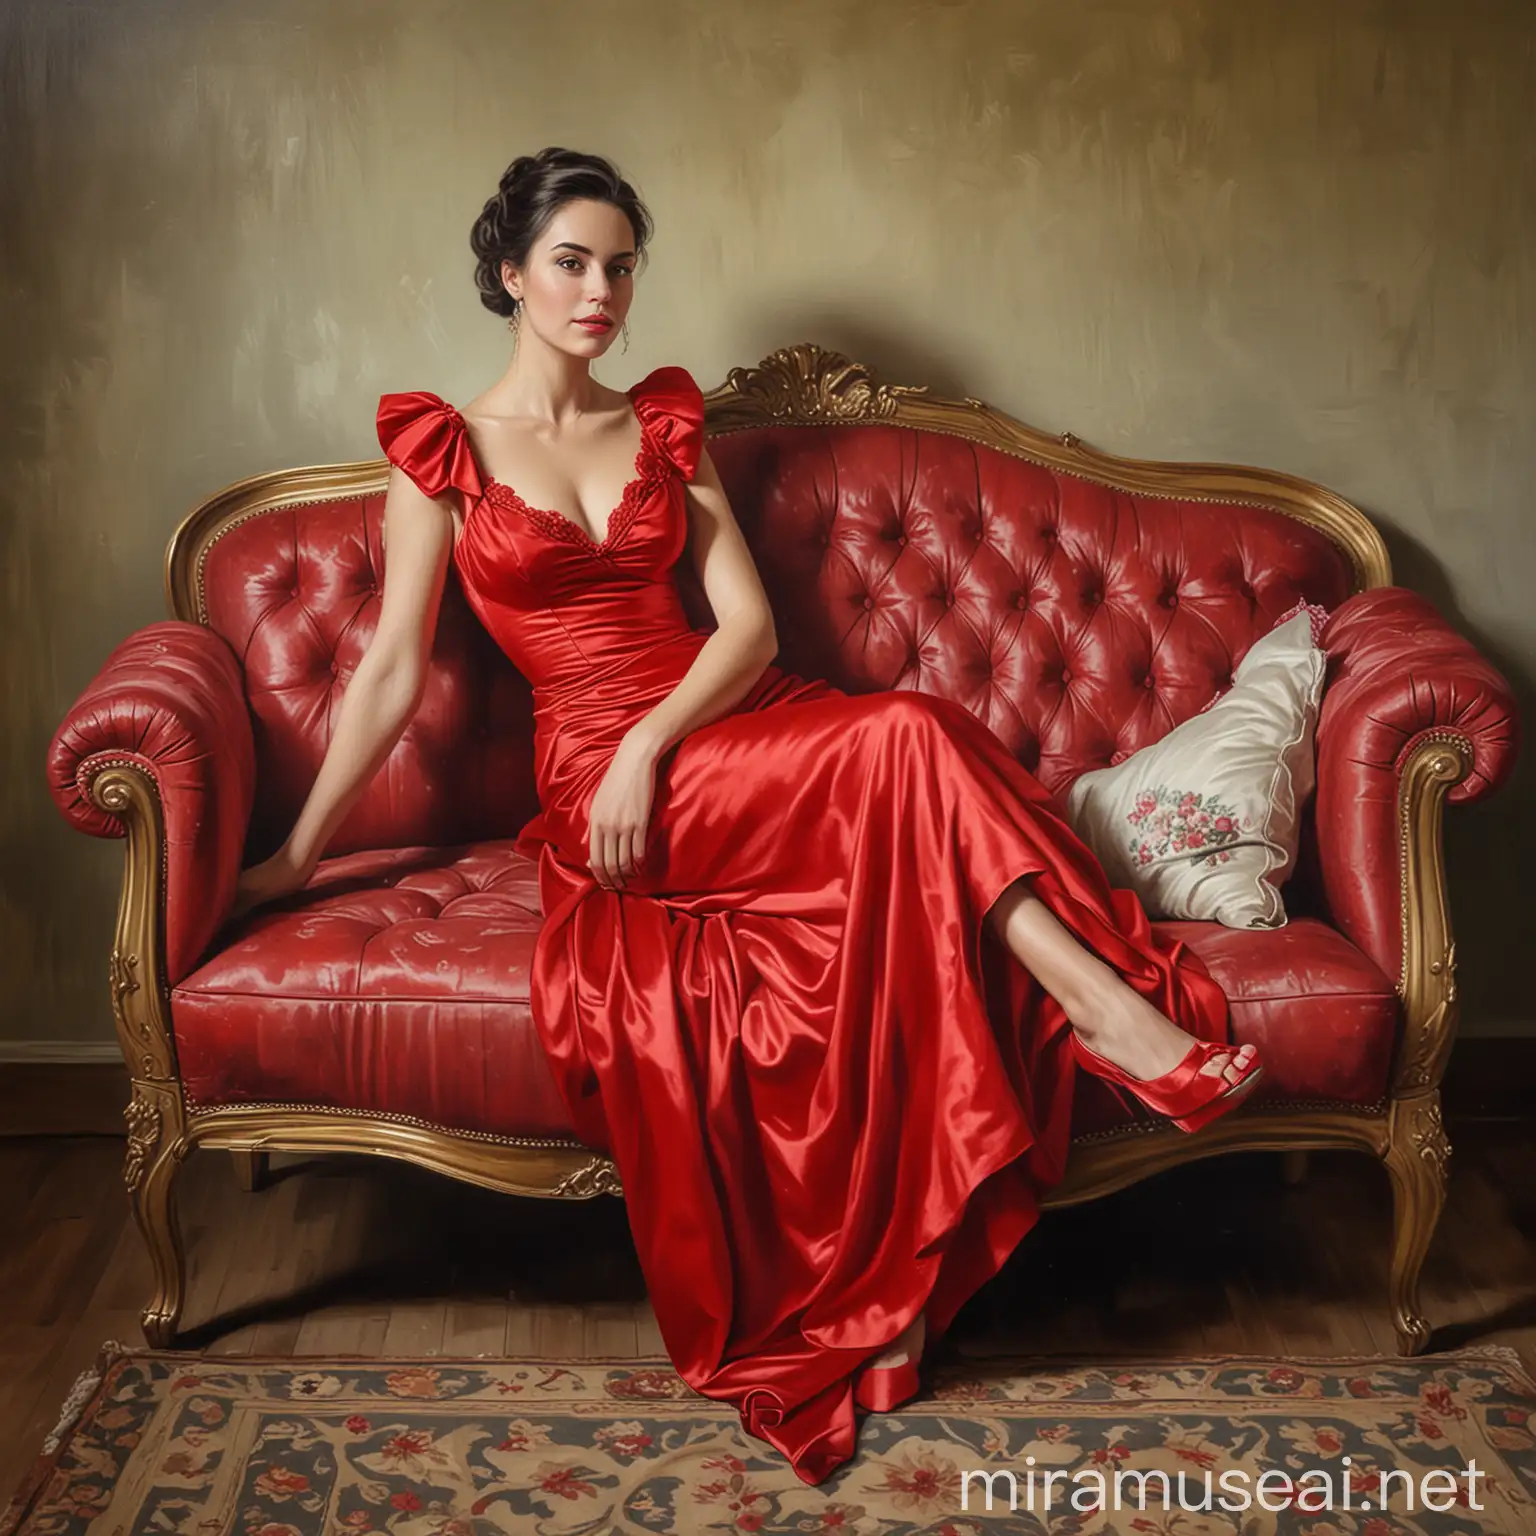 Elegant Lady in Red Dress Sitting on Luxurious Couch